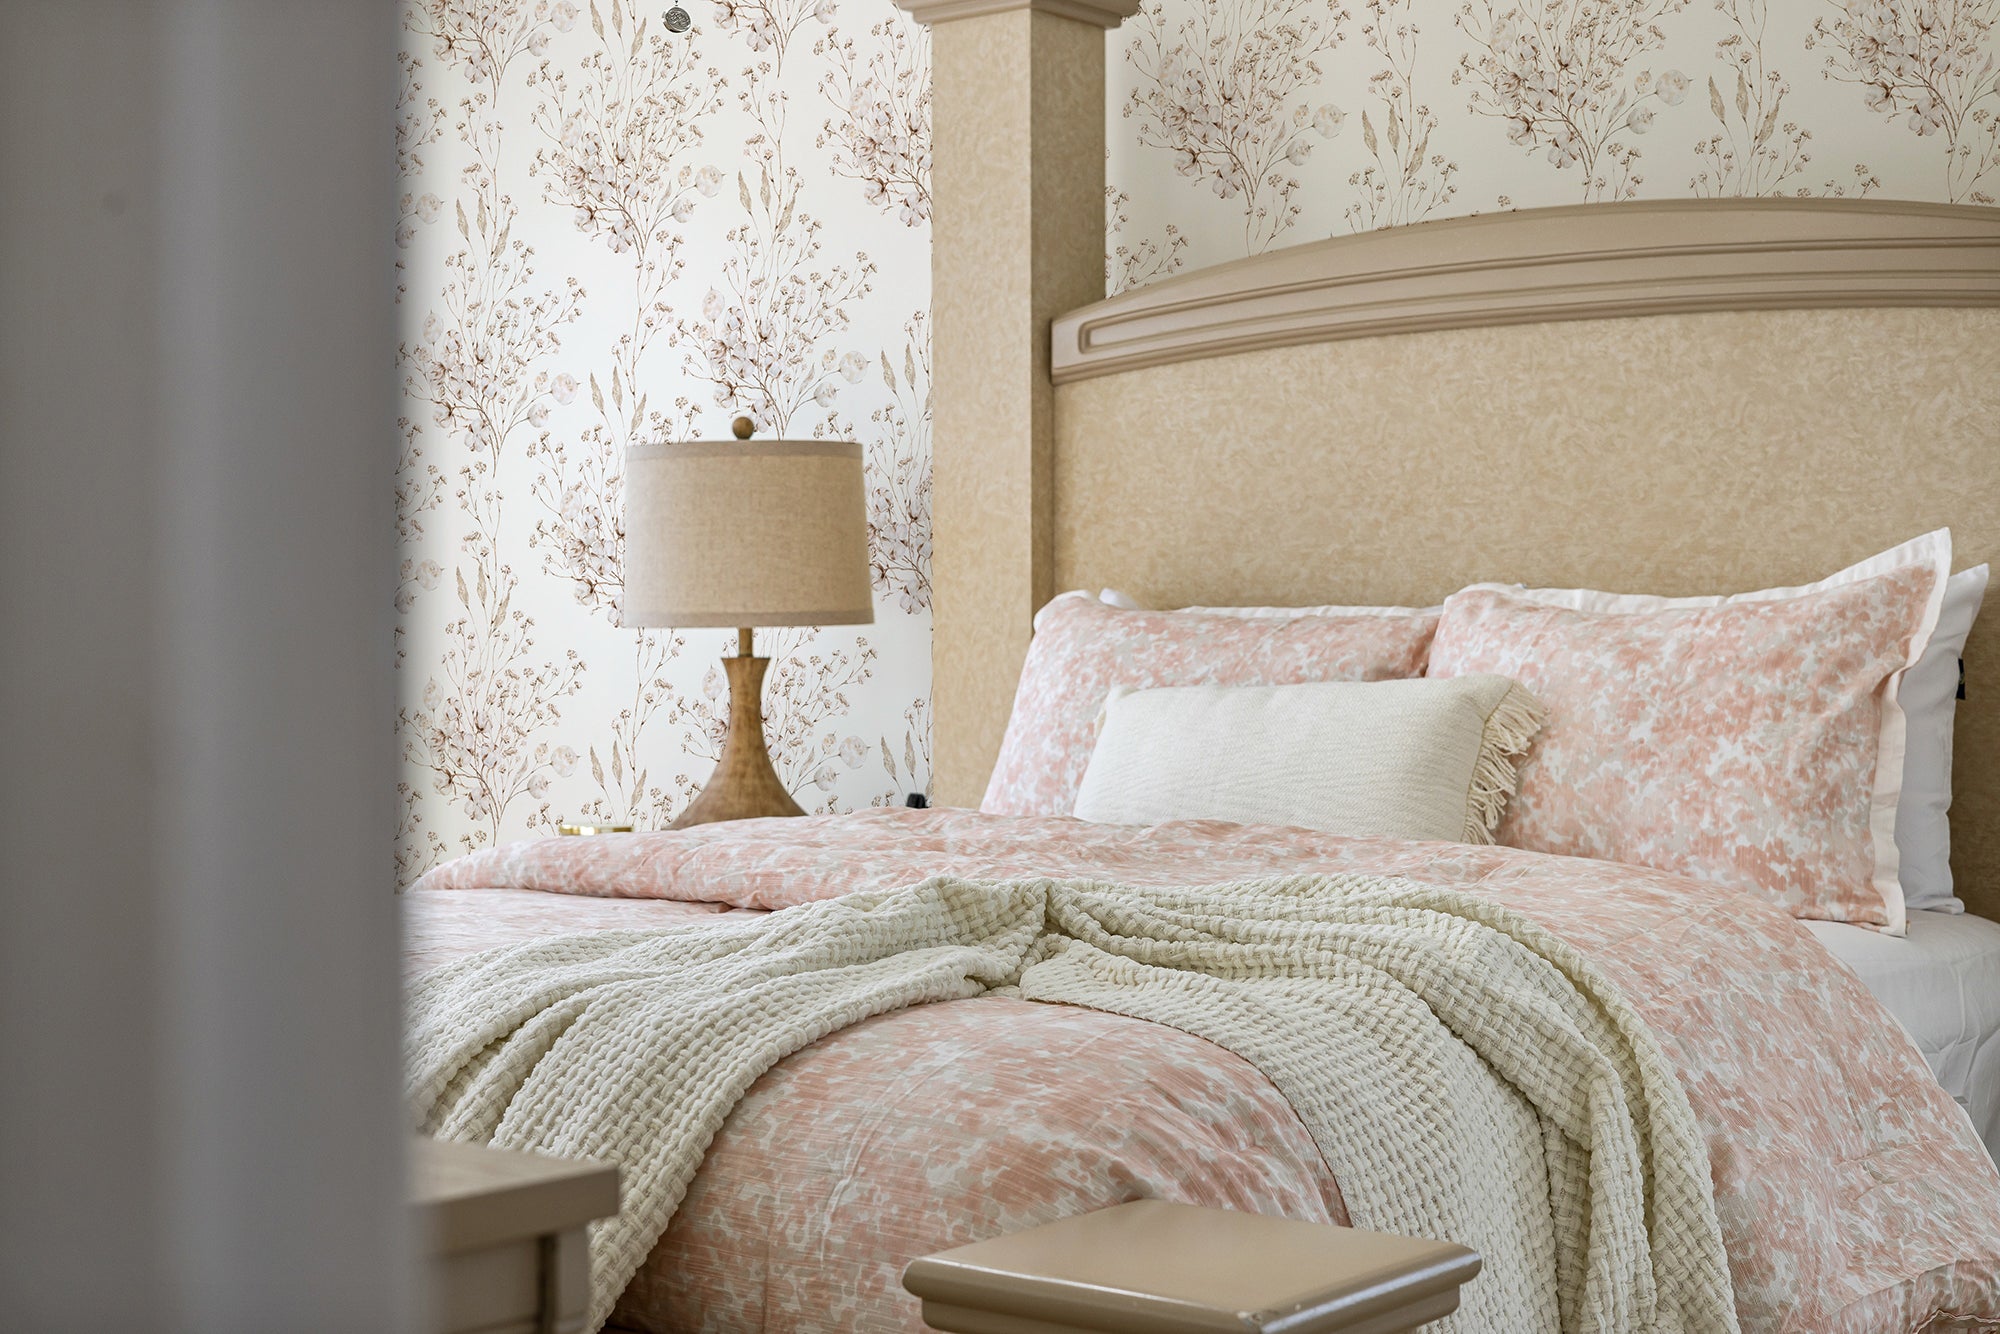 A bedroom beautifully decorated with the Boho Winter Floral Wallpaper, creating a soothing ambiance. The wallpaper pairs perfectly with light pink bedding and a knitted throw, emphasizing a warm and inviting winter atmosphere.